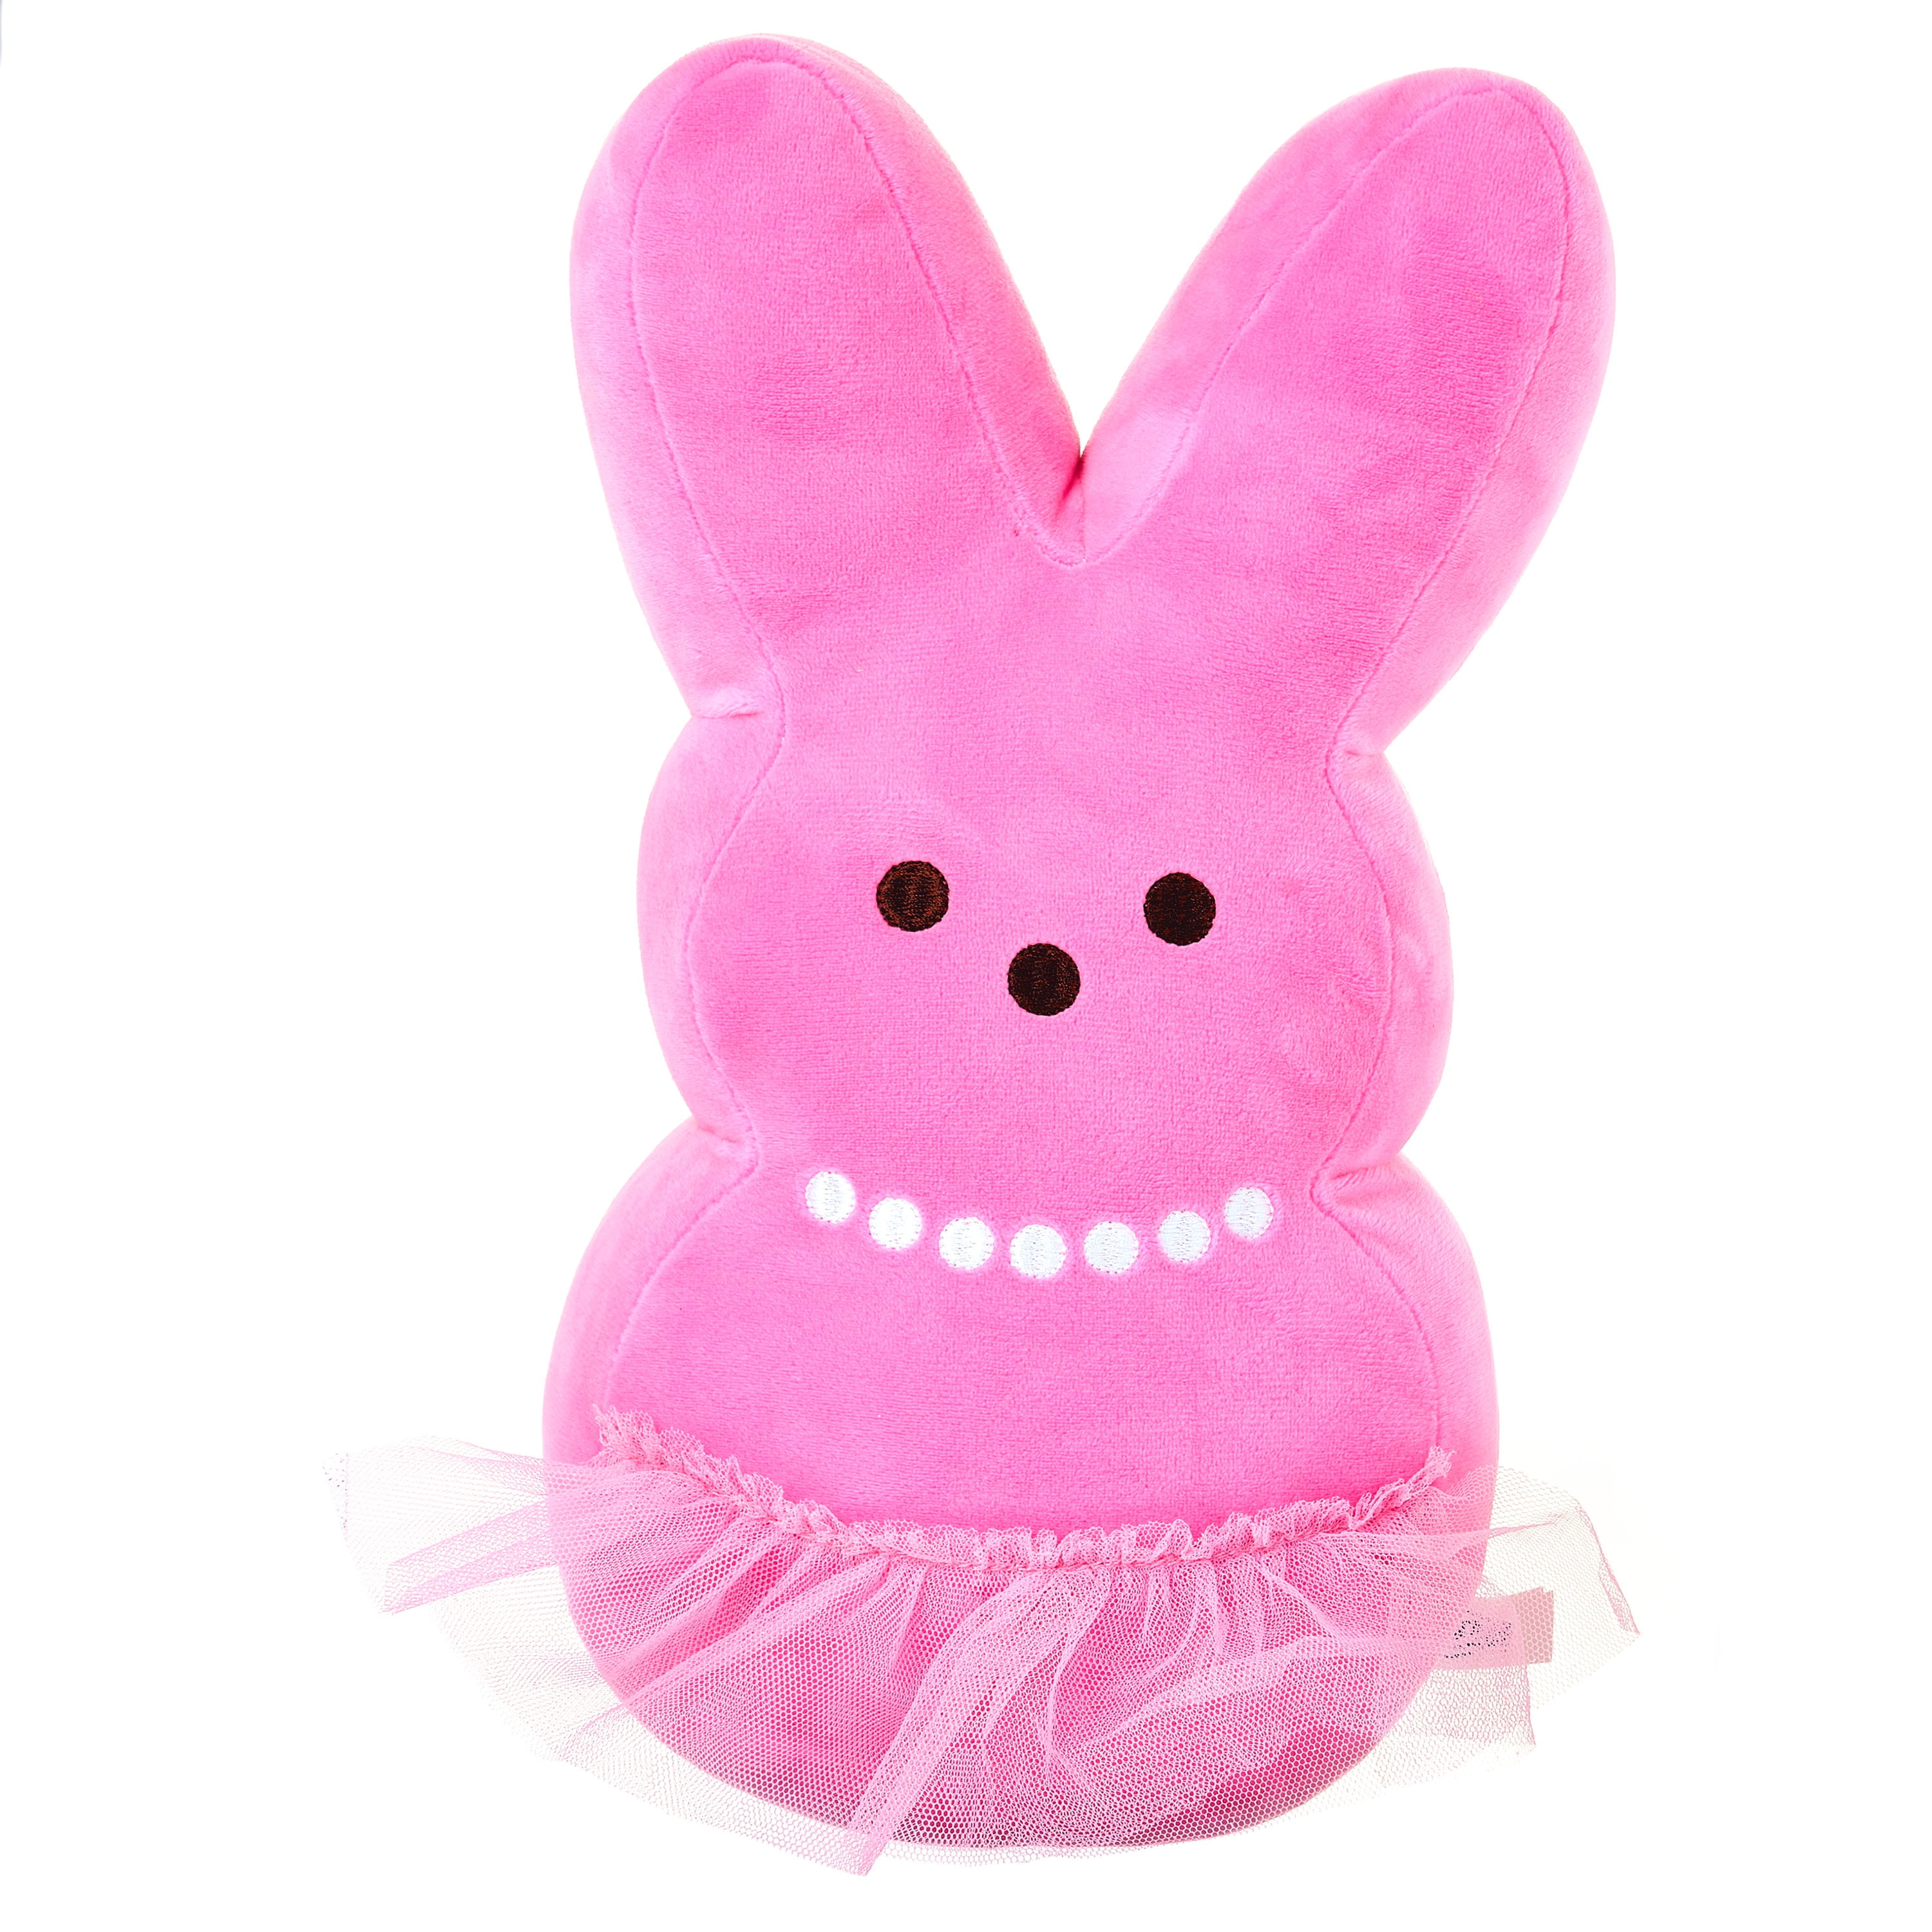 Peeps Easter Peep Bunny Pink Emo Love Punk 15in Plush New with Tag